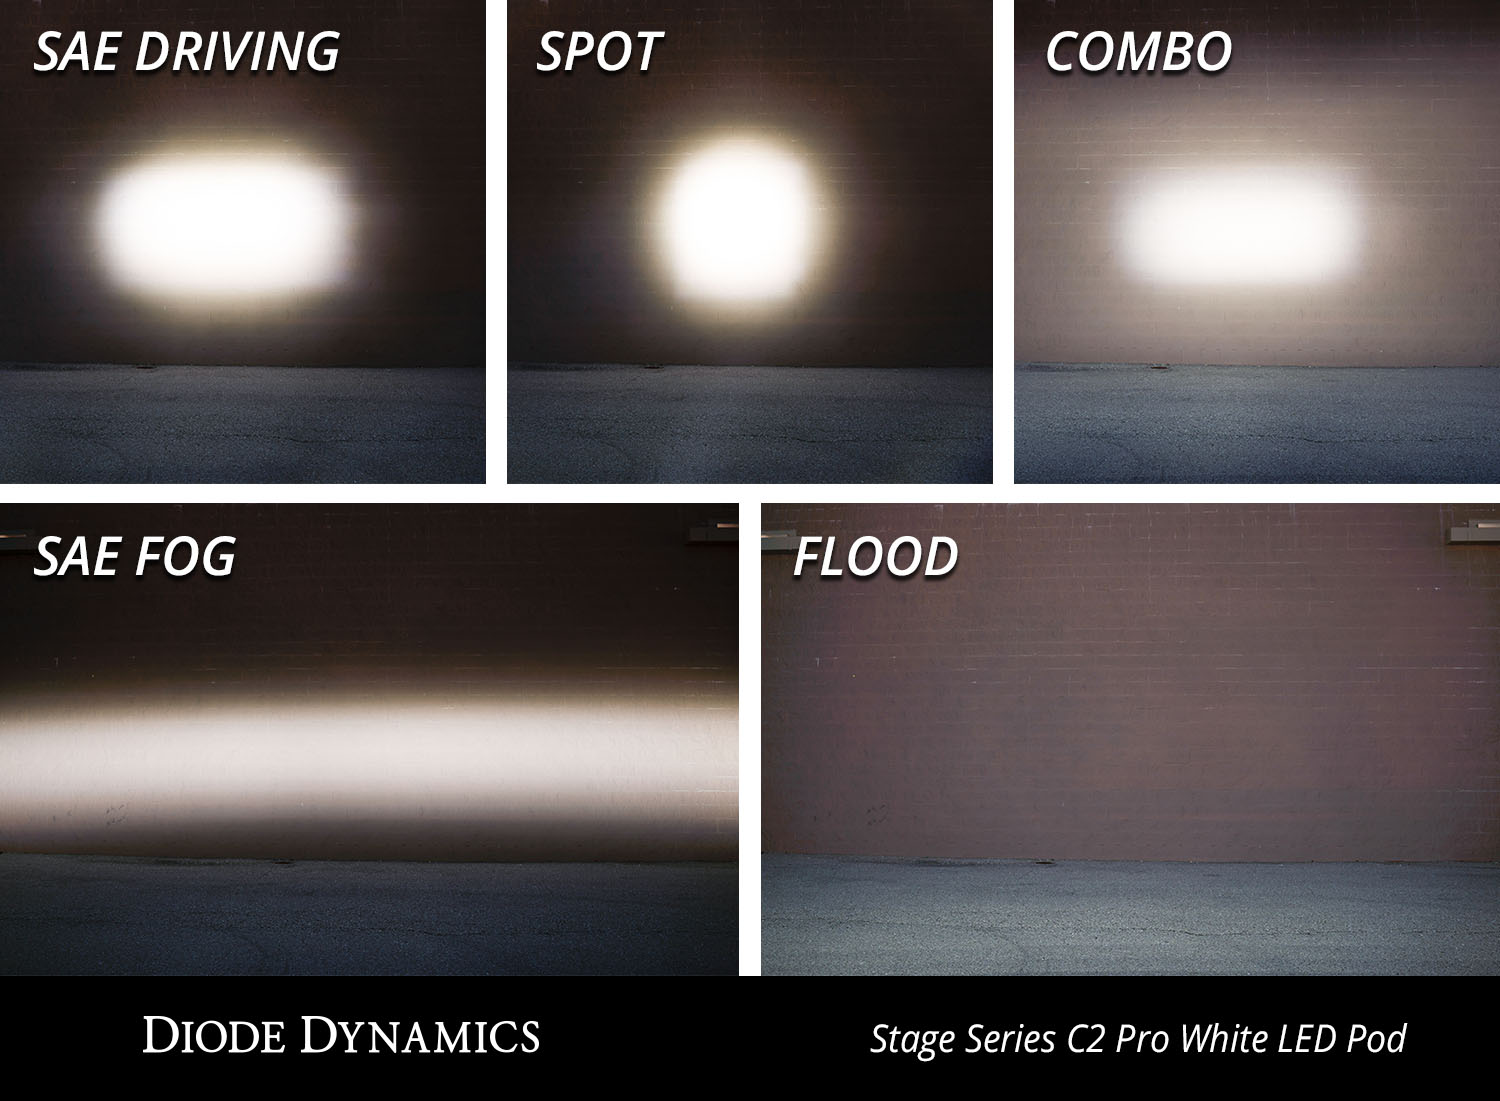 Diode Dynamics Stage Series 2 Inch LED Pod, Sport White Flood Standard BBL Each